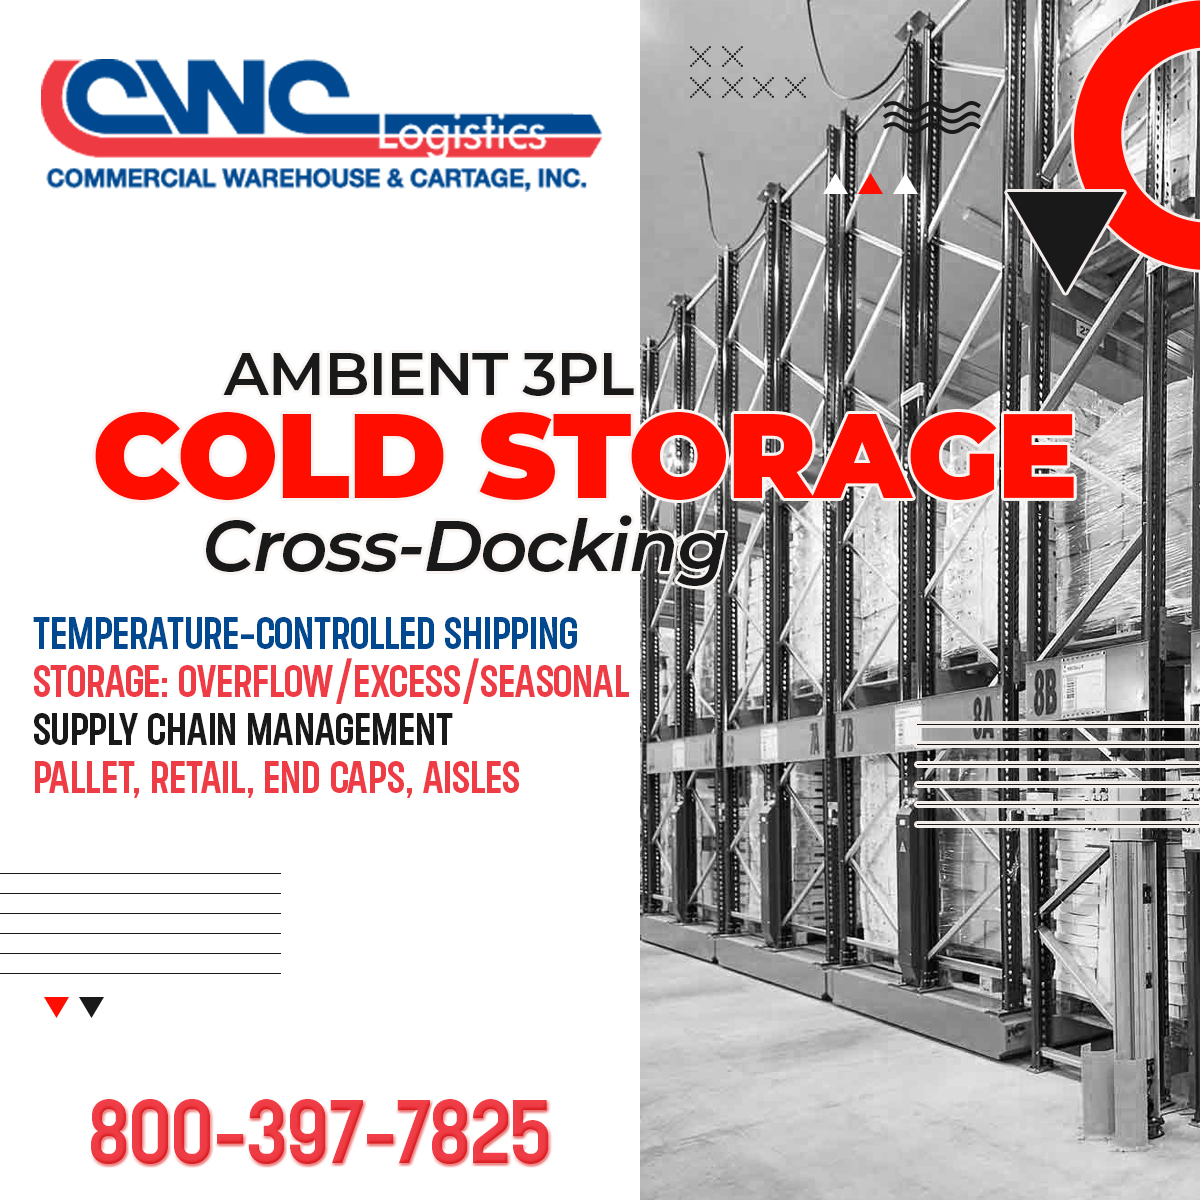 Commercial Warehouse & Cartage, Inc